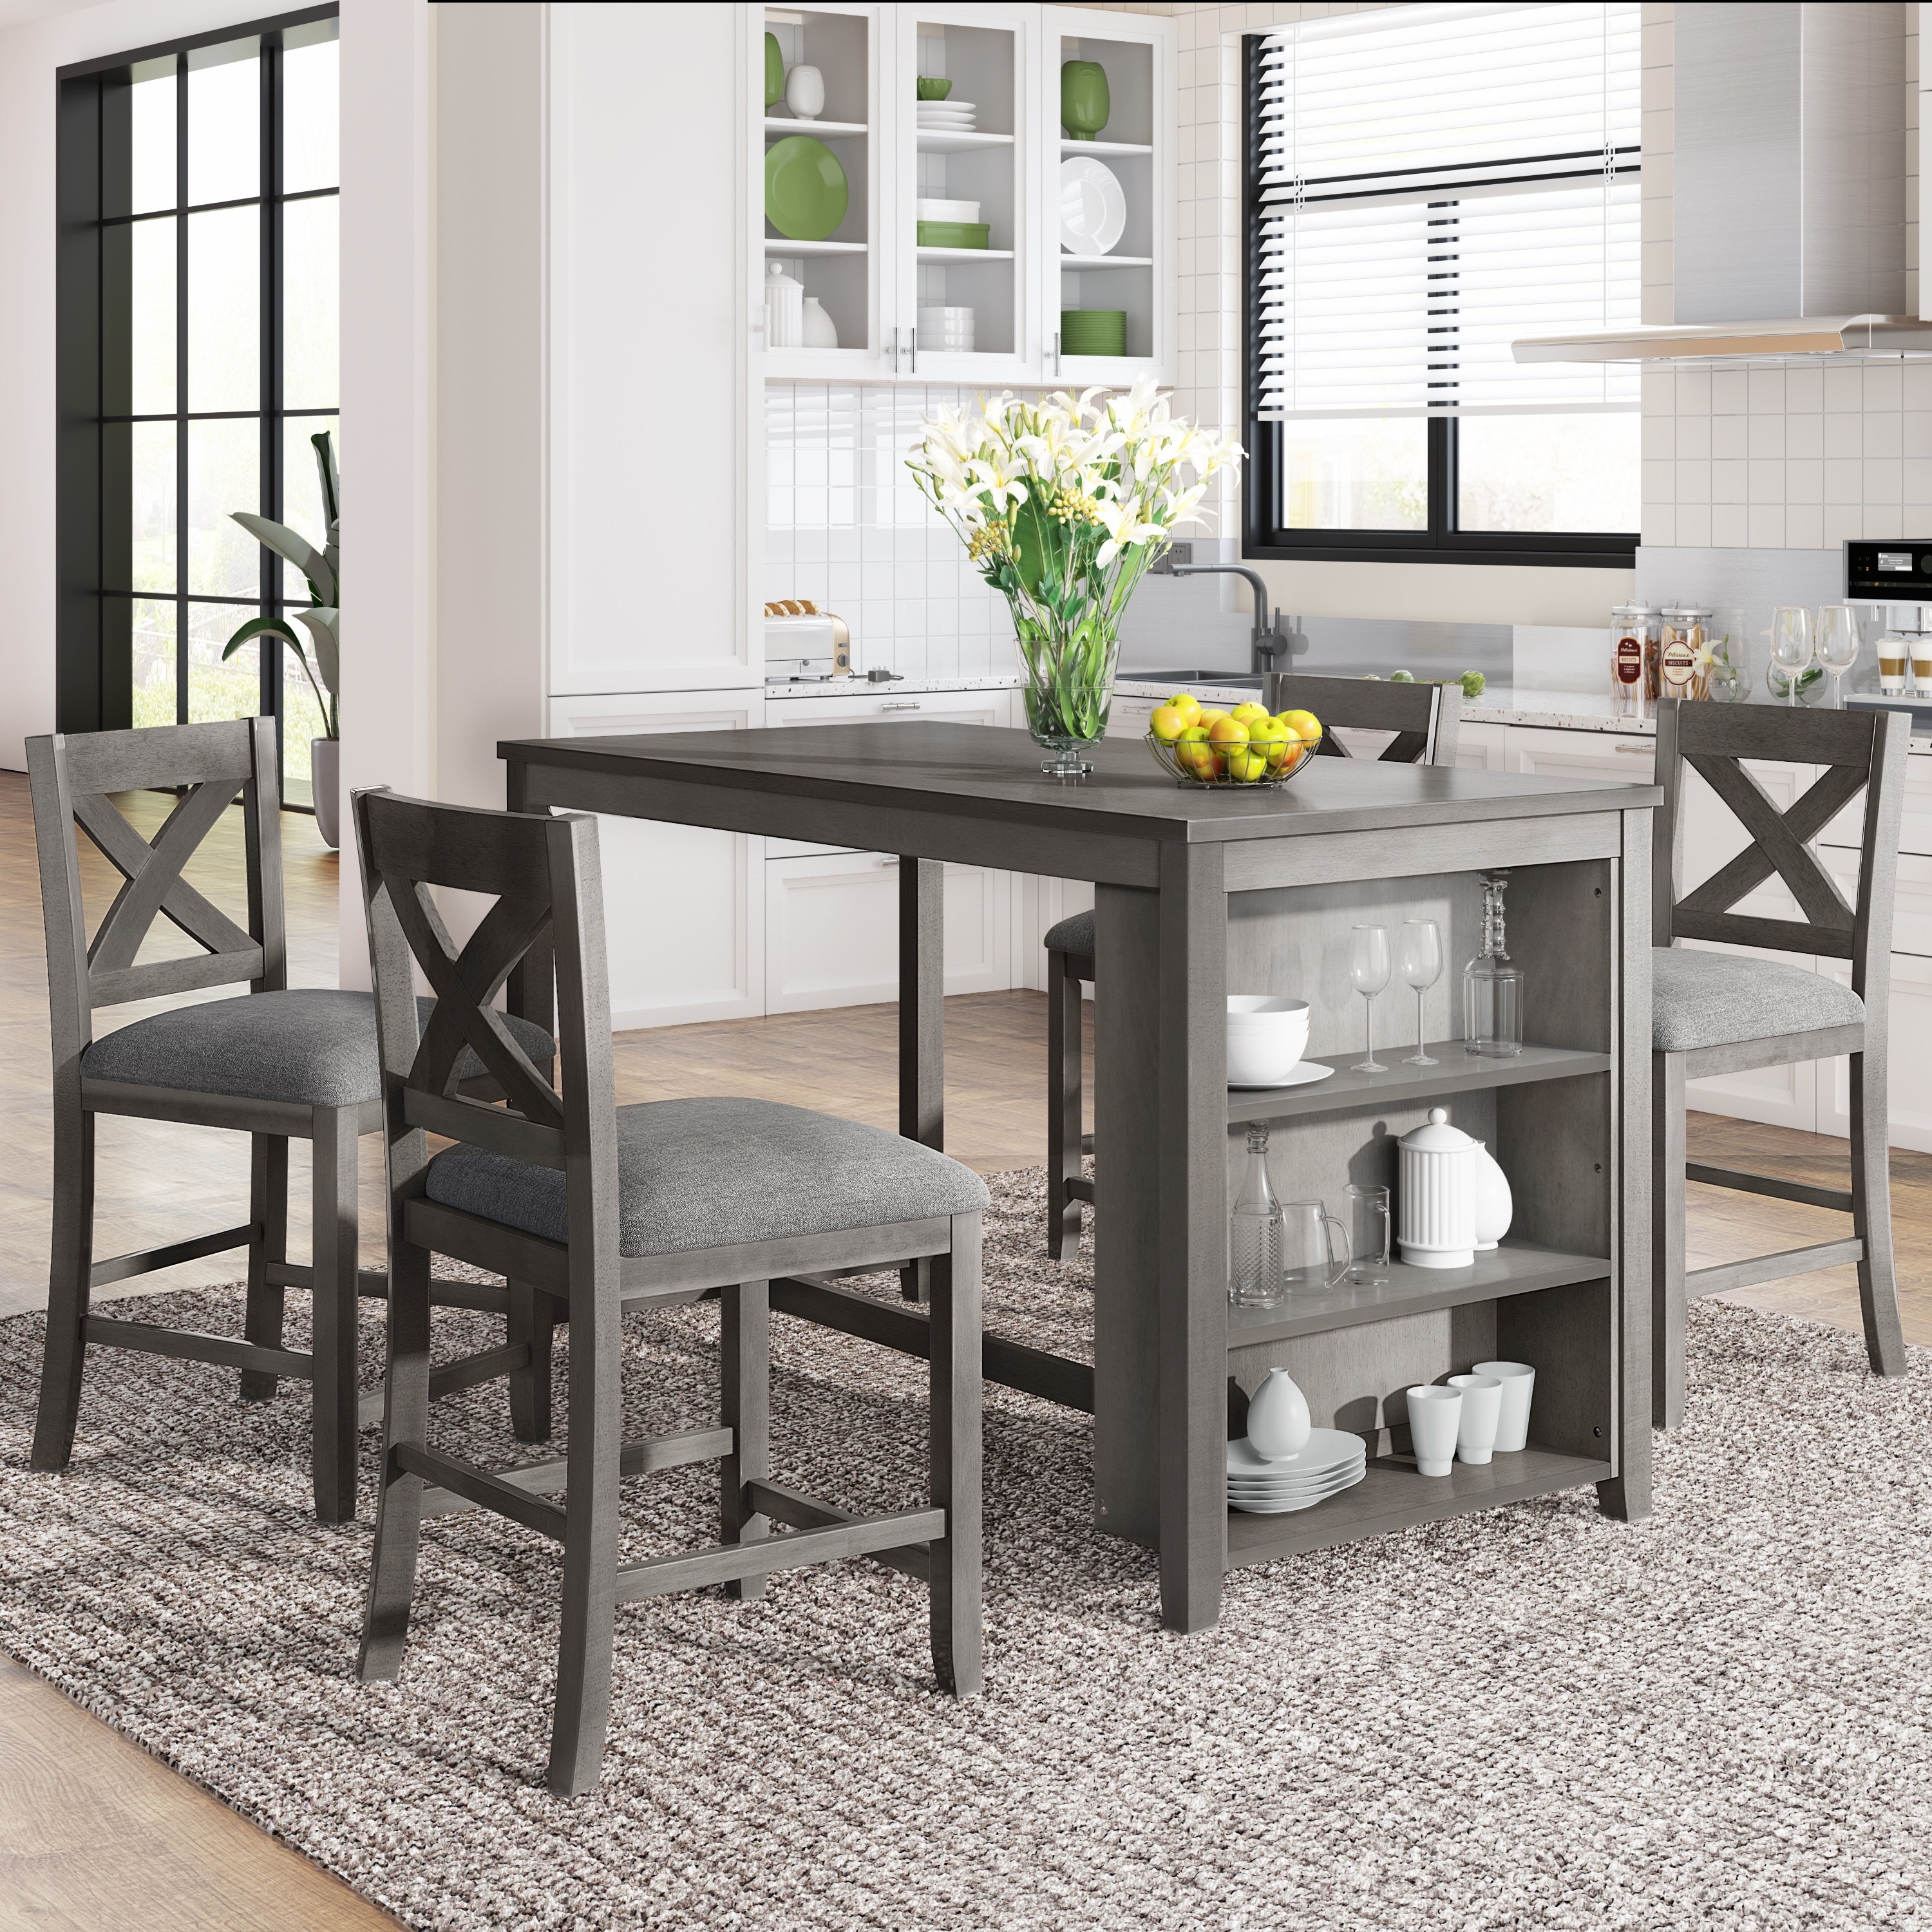 https://ak1.ostkcdn.com/images/products/is/images/direct/1ad8862c183d5d975257350c33c5dea247dcc051/5-Pieces-Counter-Height-Rustic-Farmhouse-Dining-Room-Wooden-Bar-Table-Set-with-4-Chairs%2C-Gray.jpg